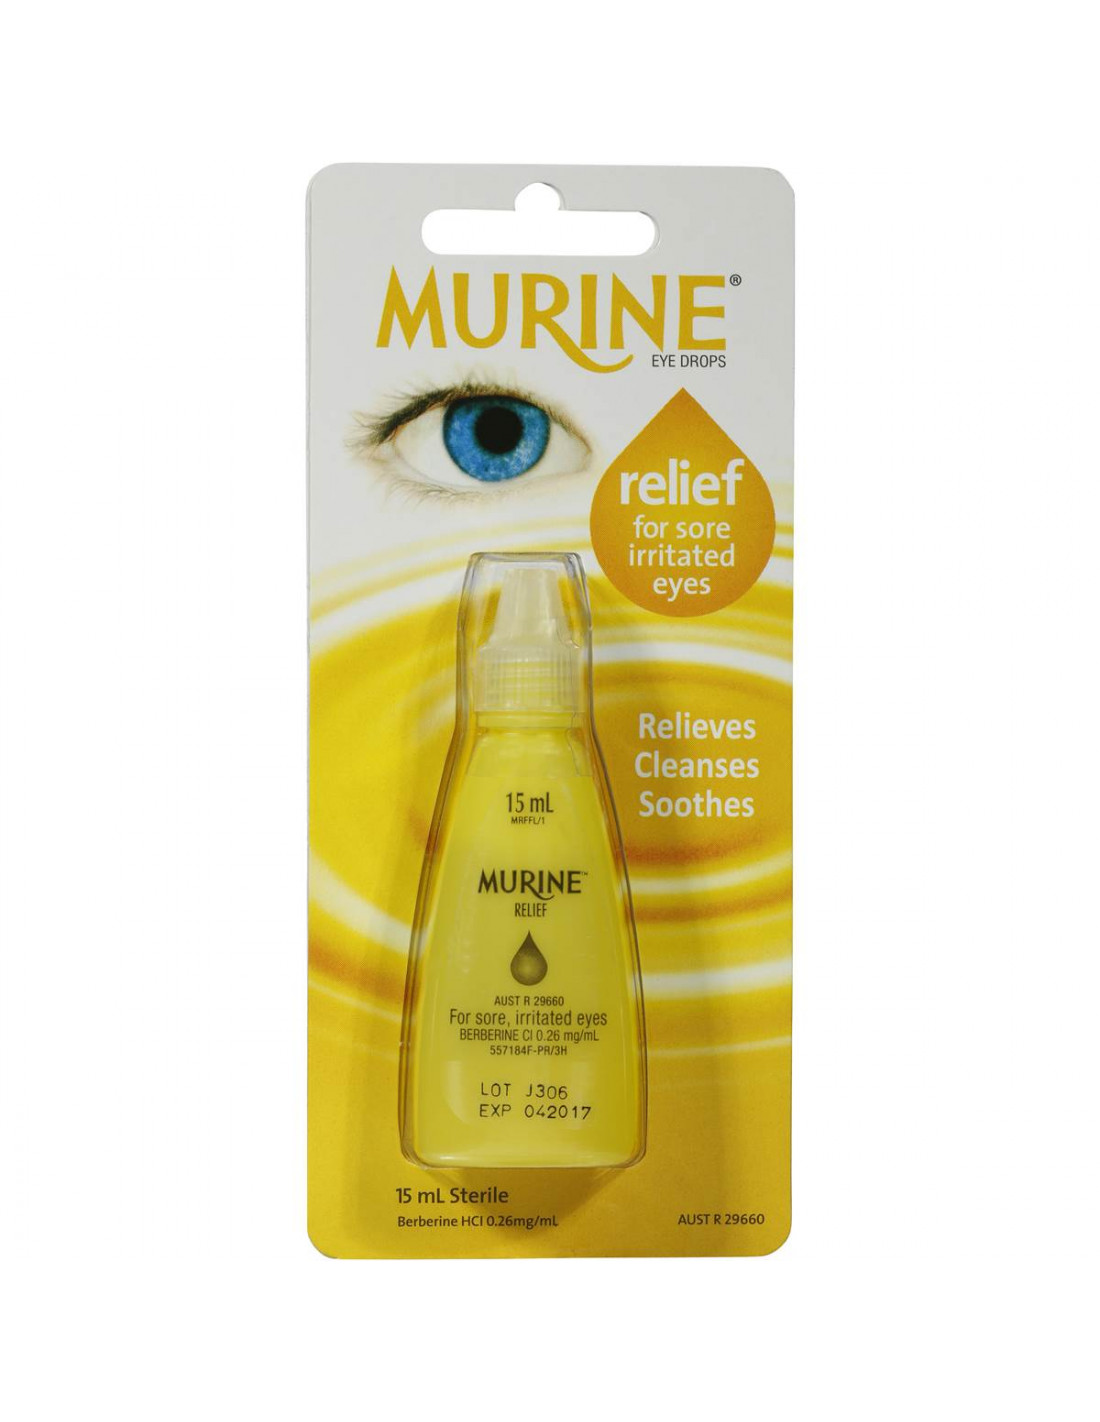 Murine Eye Drops Relief 15ml | Ally's Basket - Direct from Australia